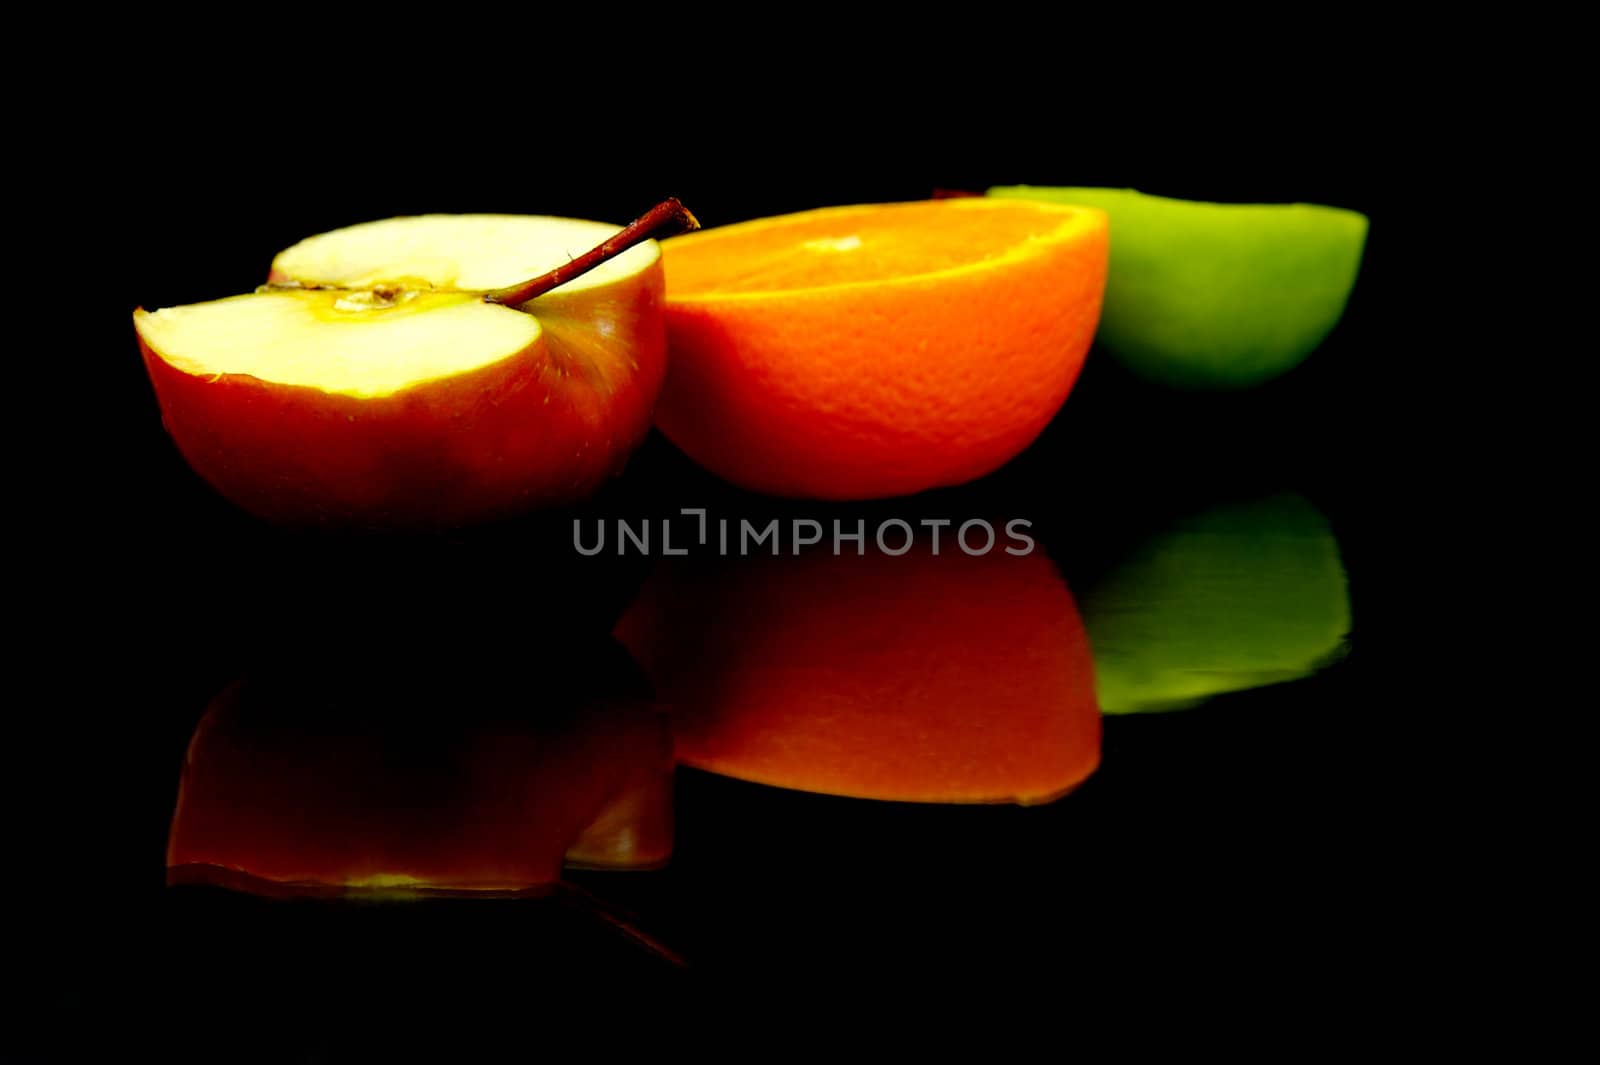 Apple and oranges isolated against a black background